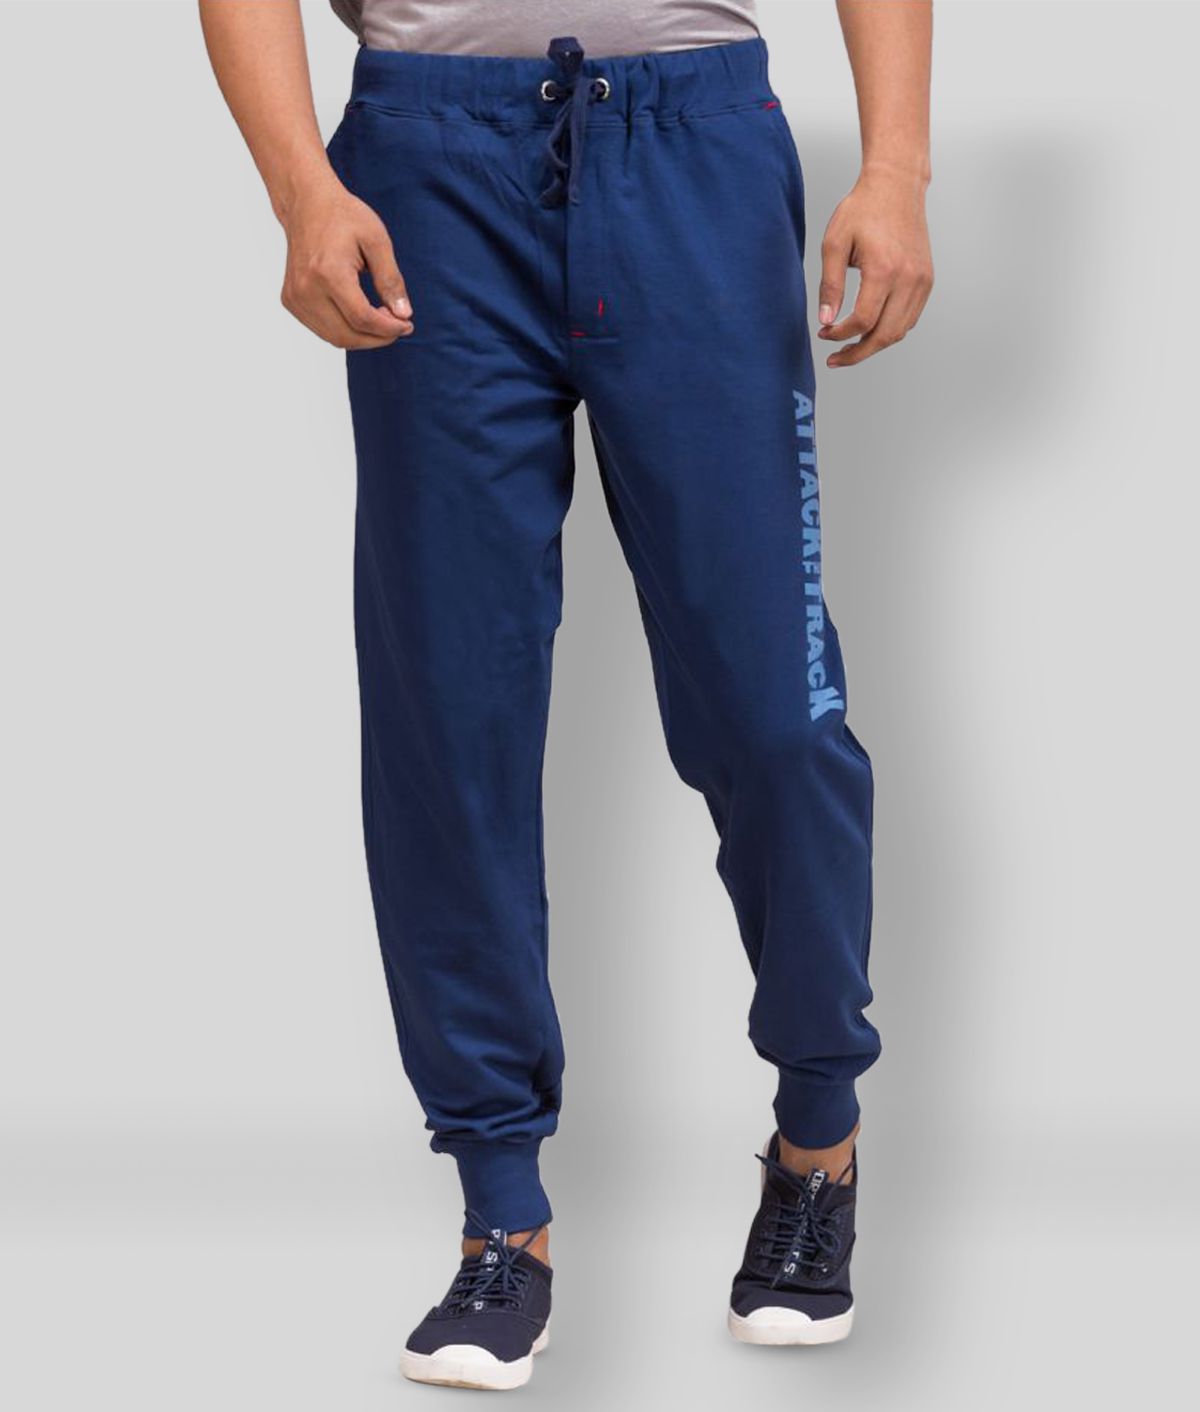     			Todd N Teen - Blue Cotton Men's Joggers ( Pack of 1 )